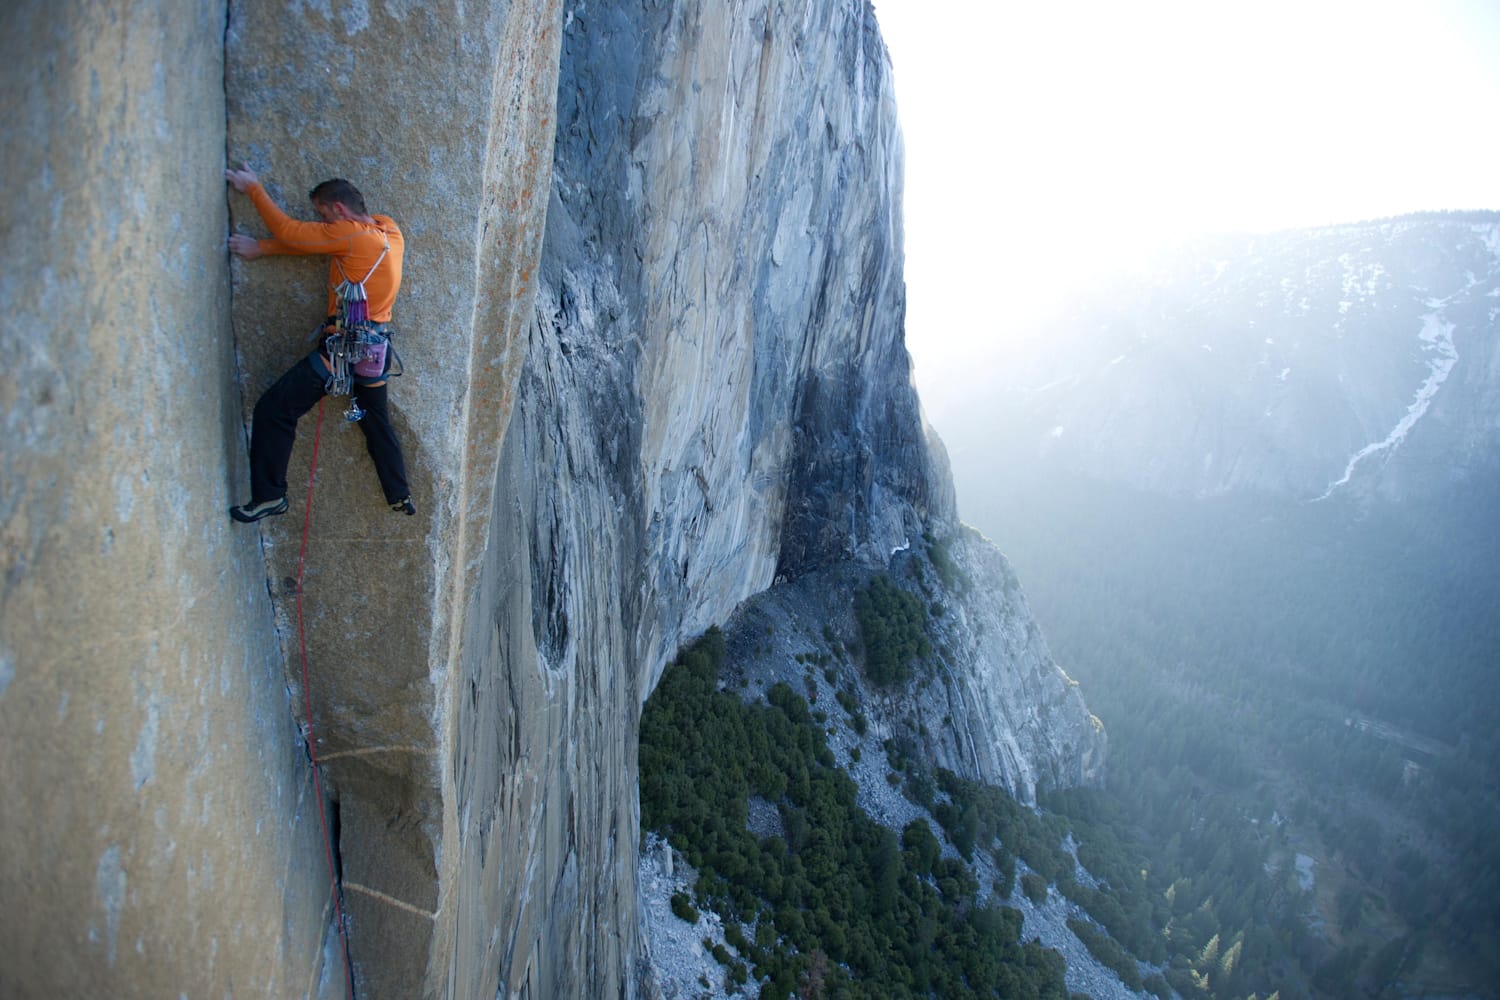 Hardest climbs in the world: 10 incredible ascents